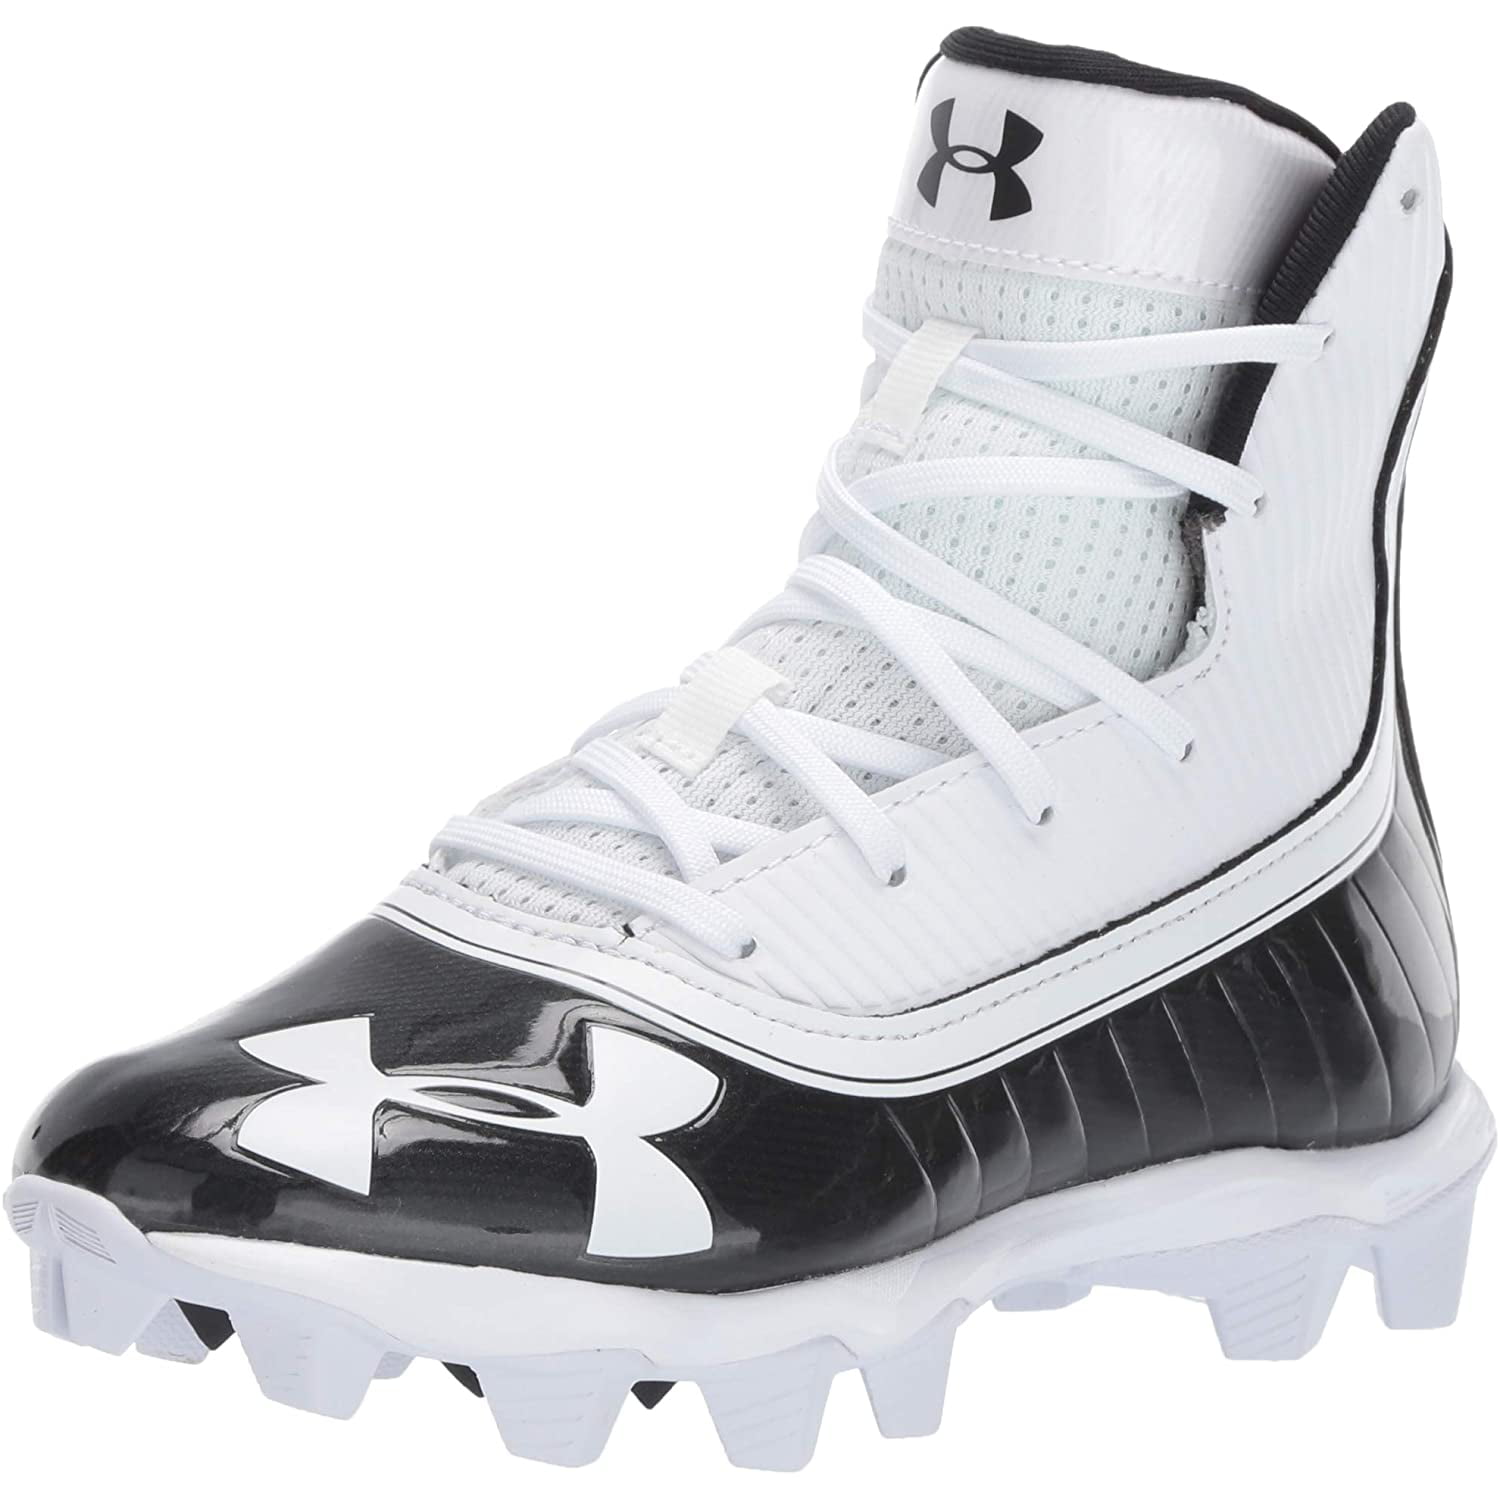 White Under Armour Highlight RM Junior Football Cleats NEW Black 